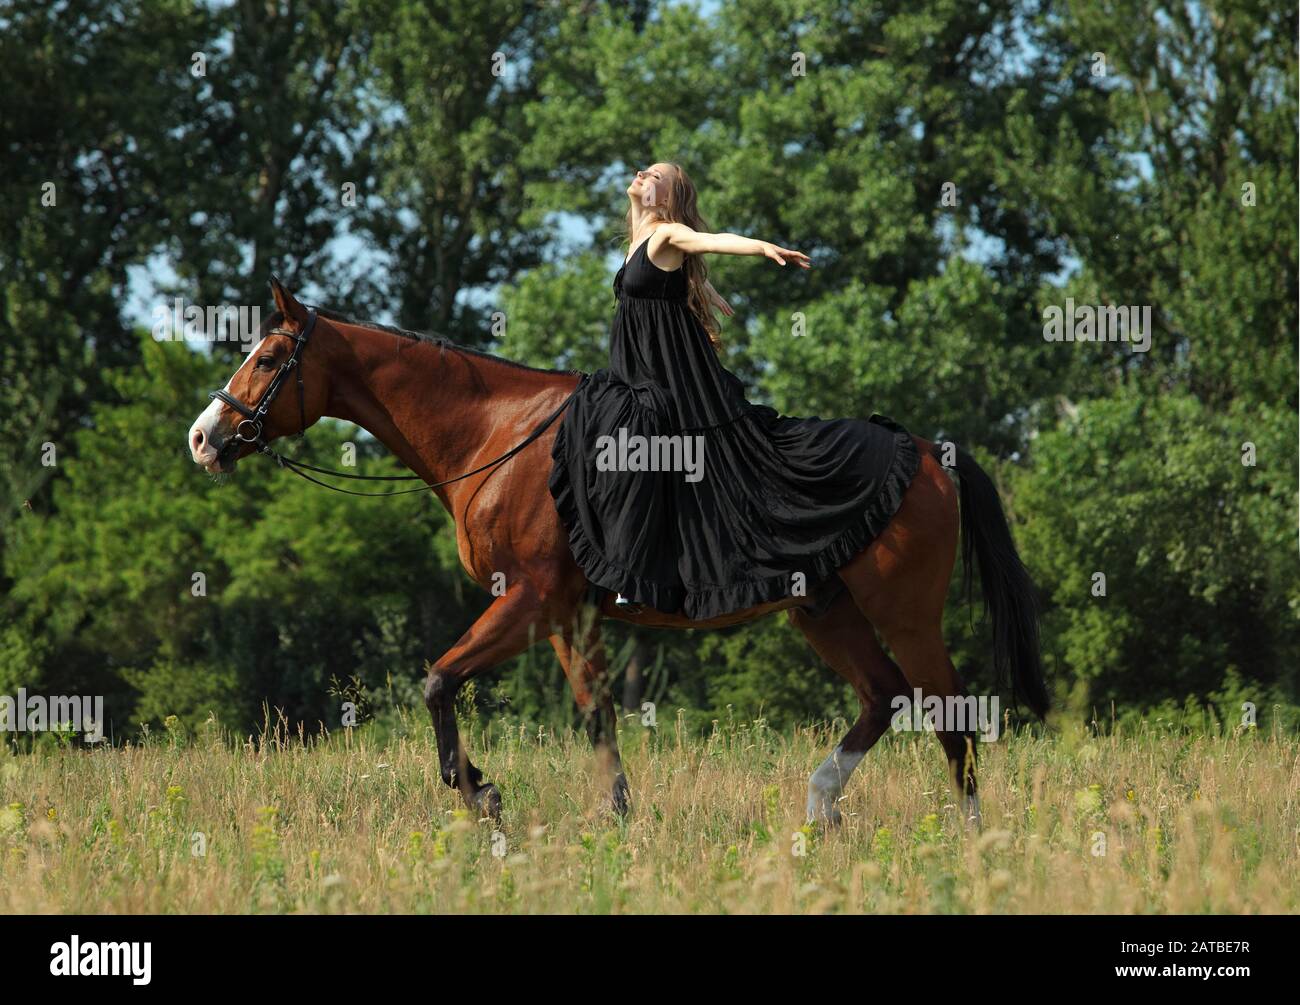 Beautiful brunette woman with long hair and black dress in the woods riding saddle horse Stock Photo